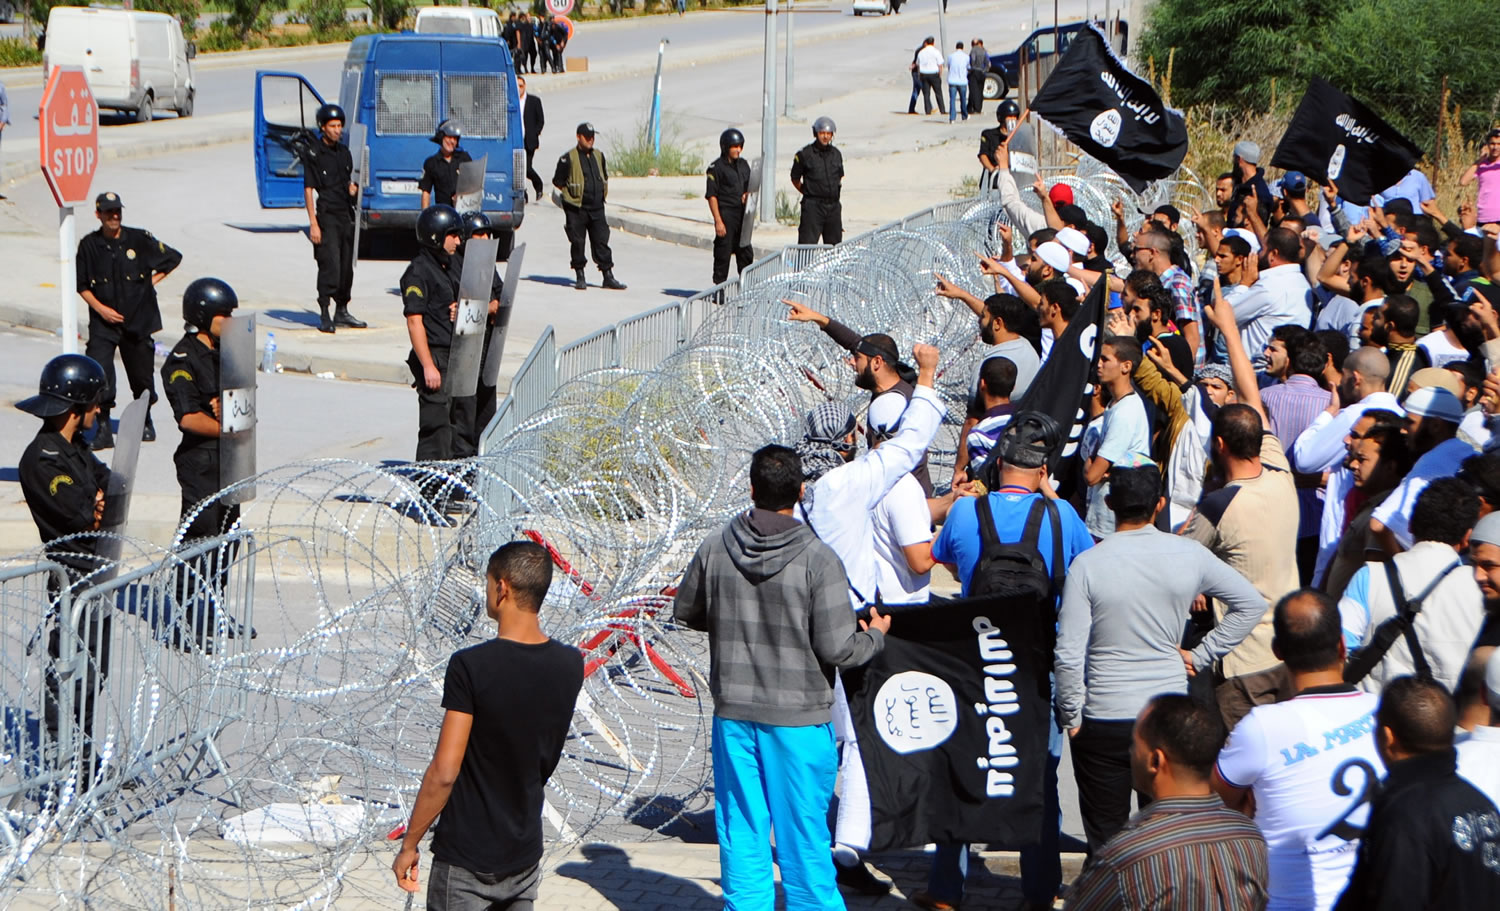 Protestors, right, face-off against riot police officers guarding the U.S. Embassy in Tunis on Friday, Sept. 14.